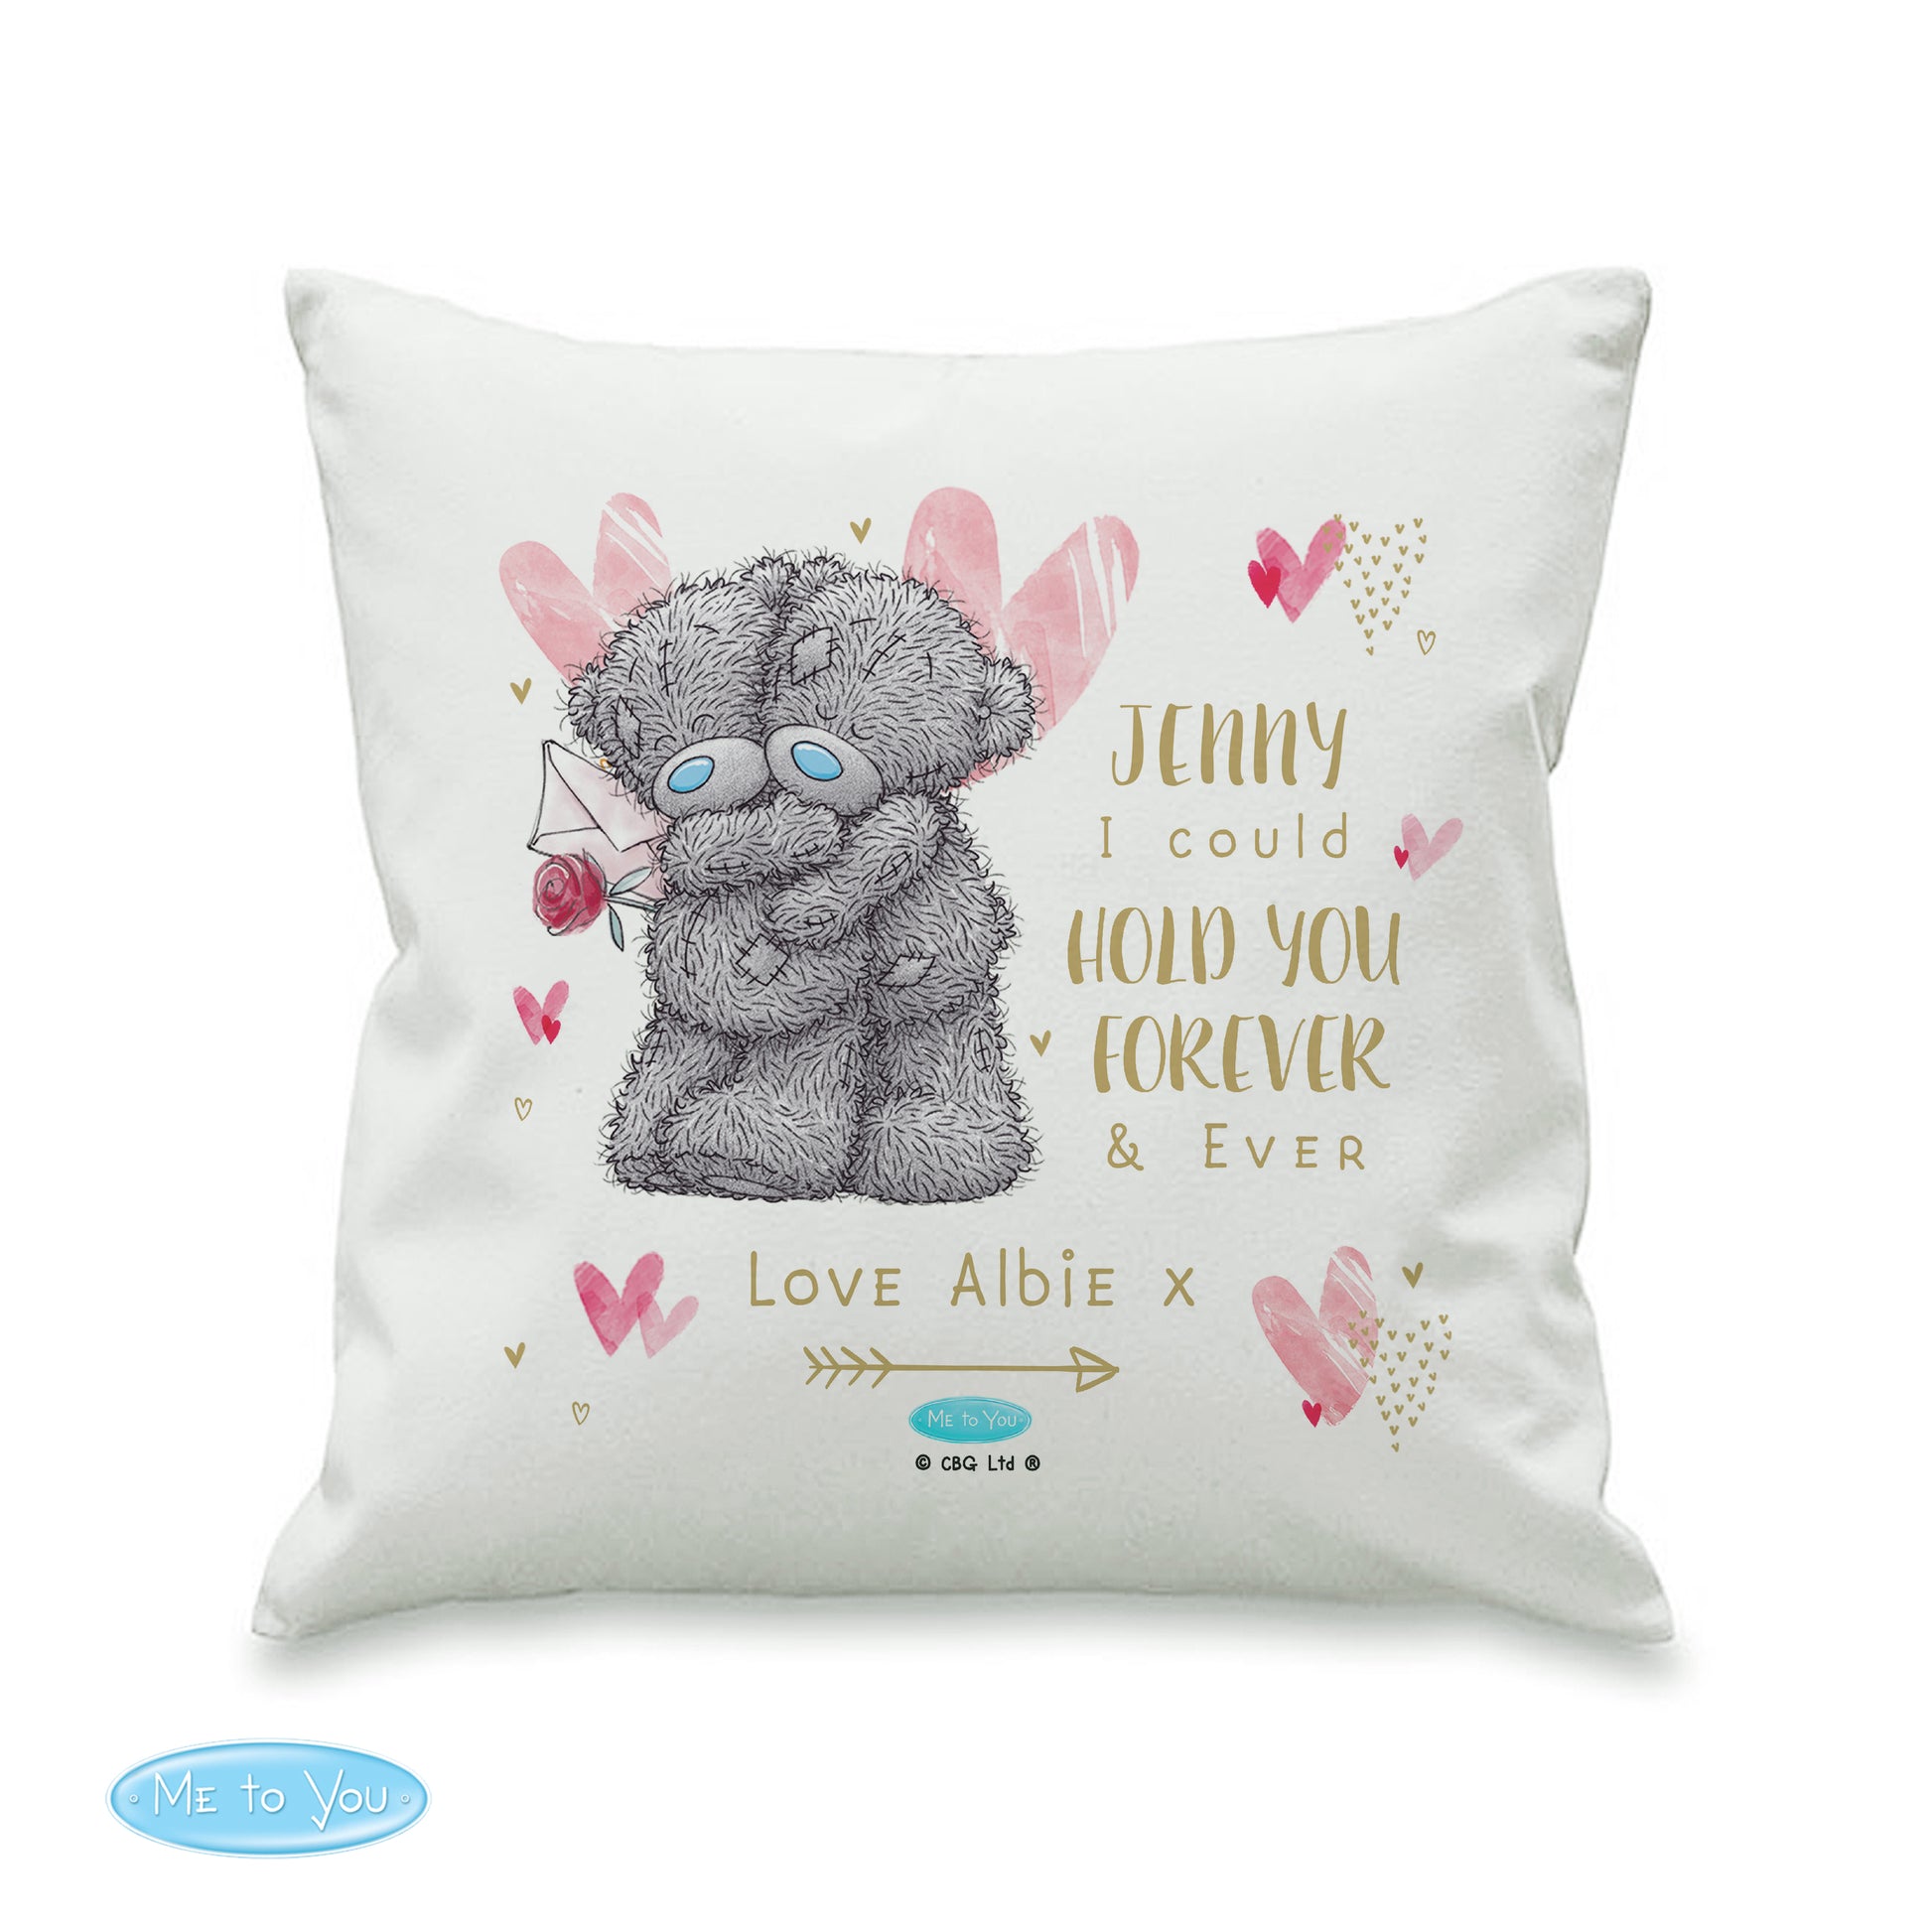 Personalised Me To You Cushion - Hold You Forever - Violet Belle Gifts - Personalised Me To You Cushion - Hold You Forever